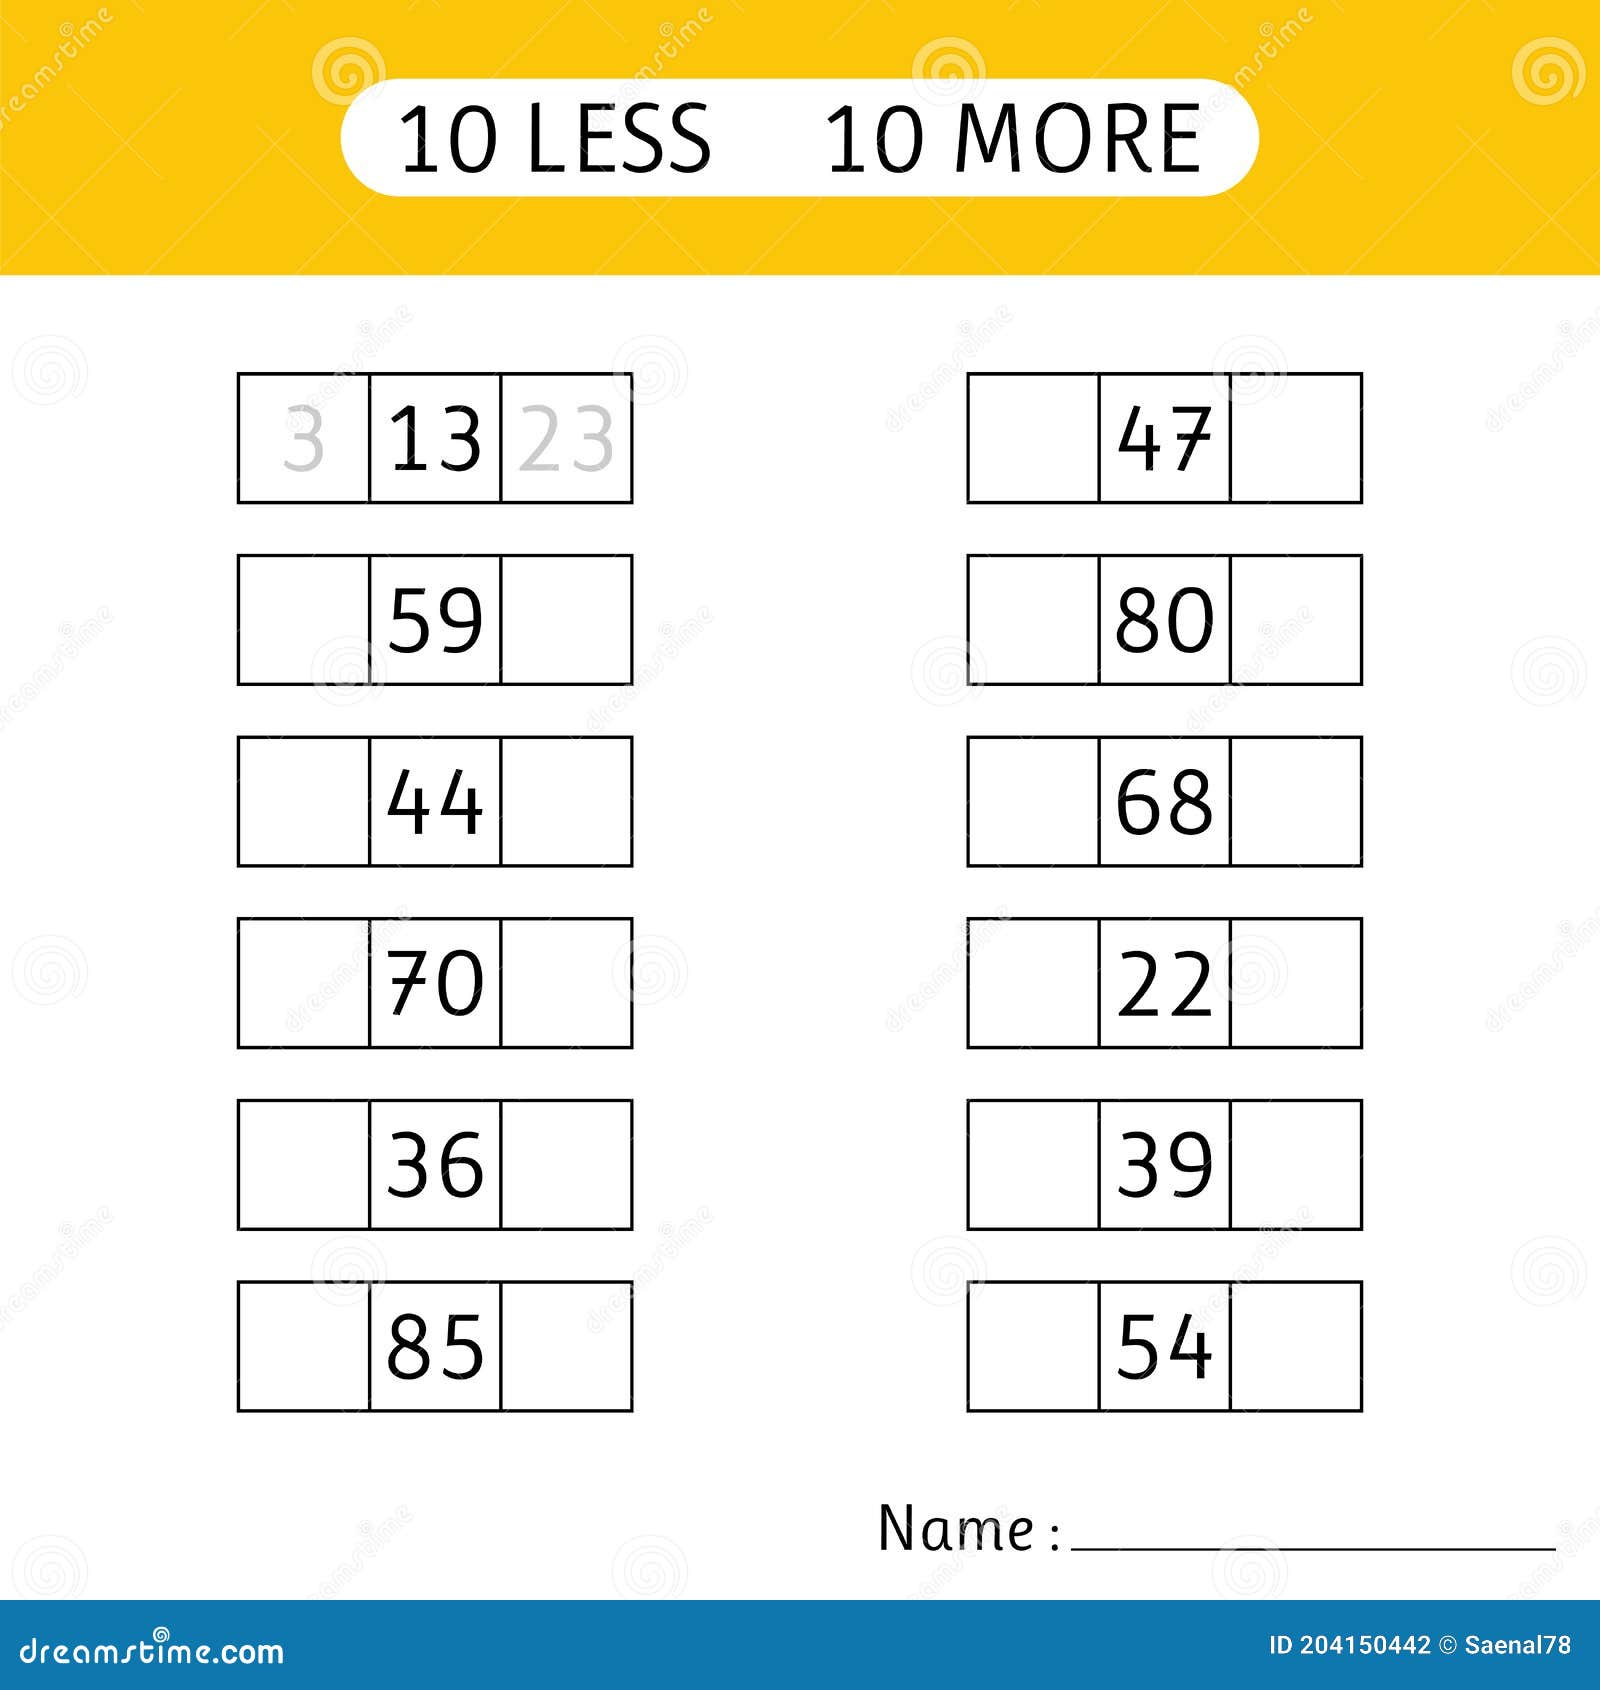 22 less, 22 More. Fill in the Missing Numbers. Worksheets for Kids Intended For Ten More Ten Less Worksheet